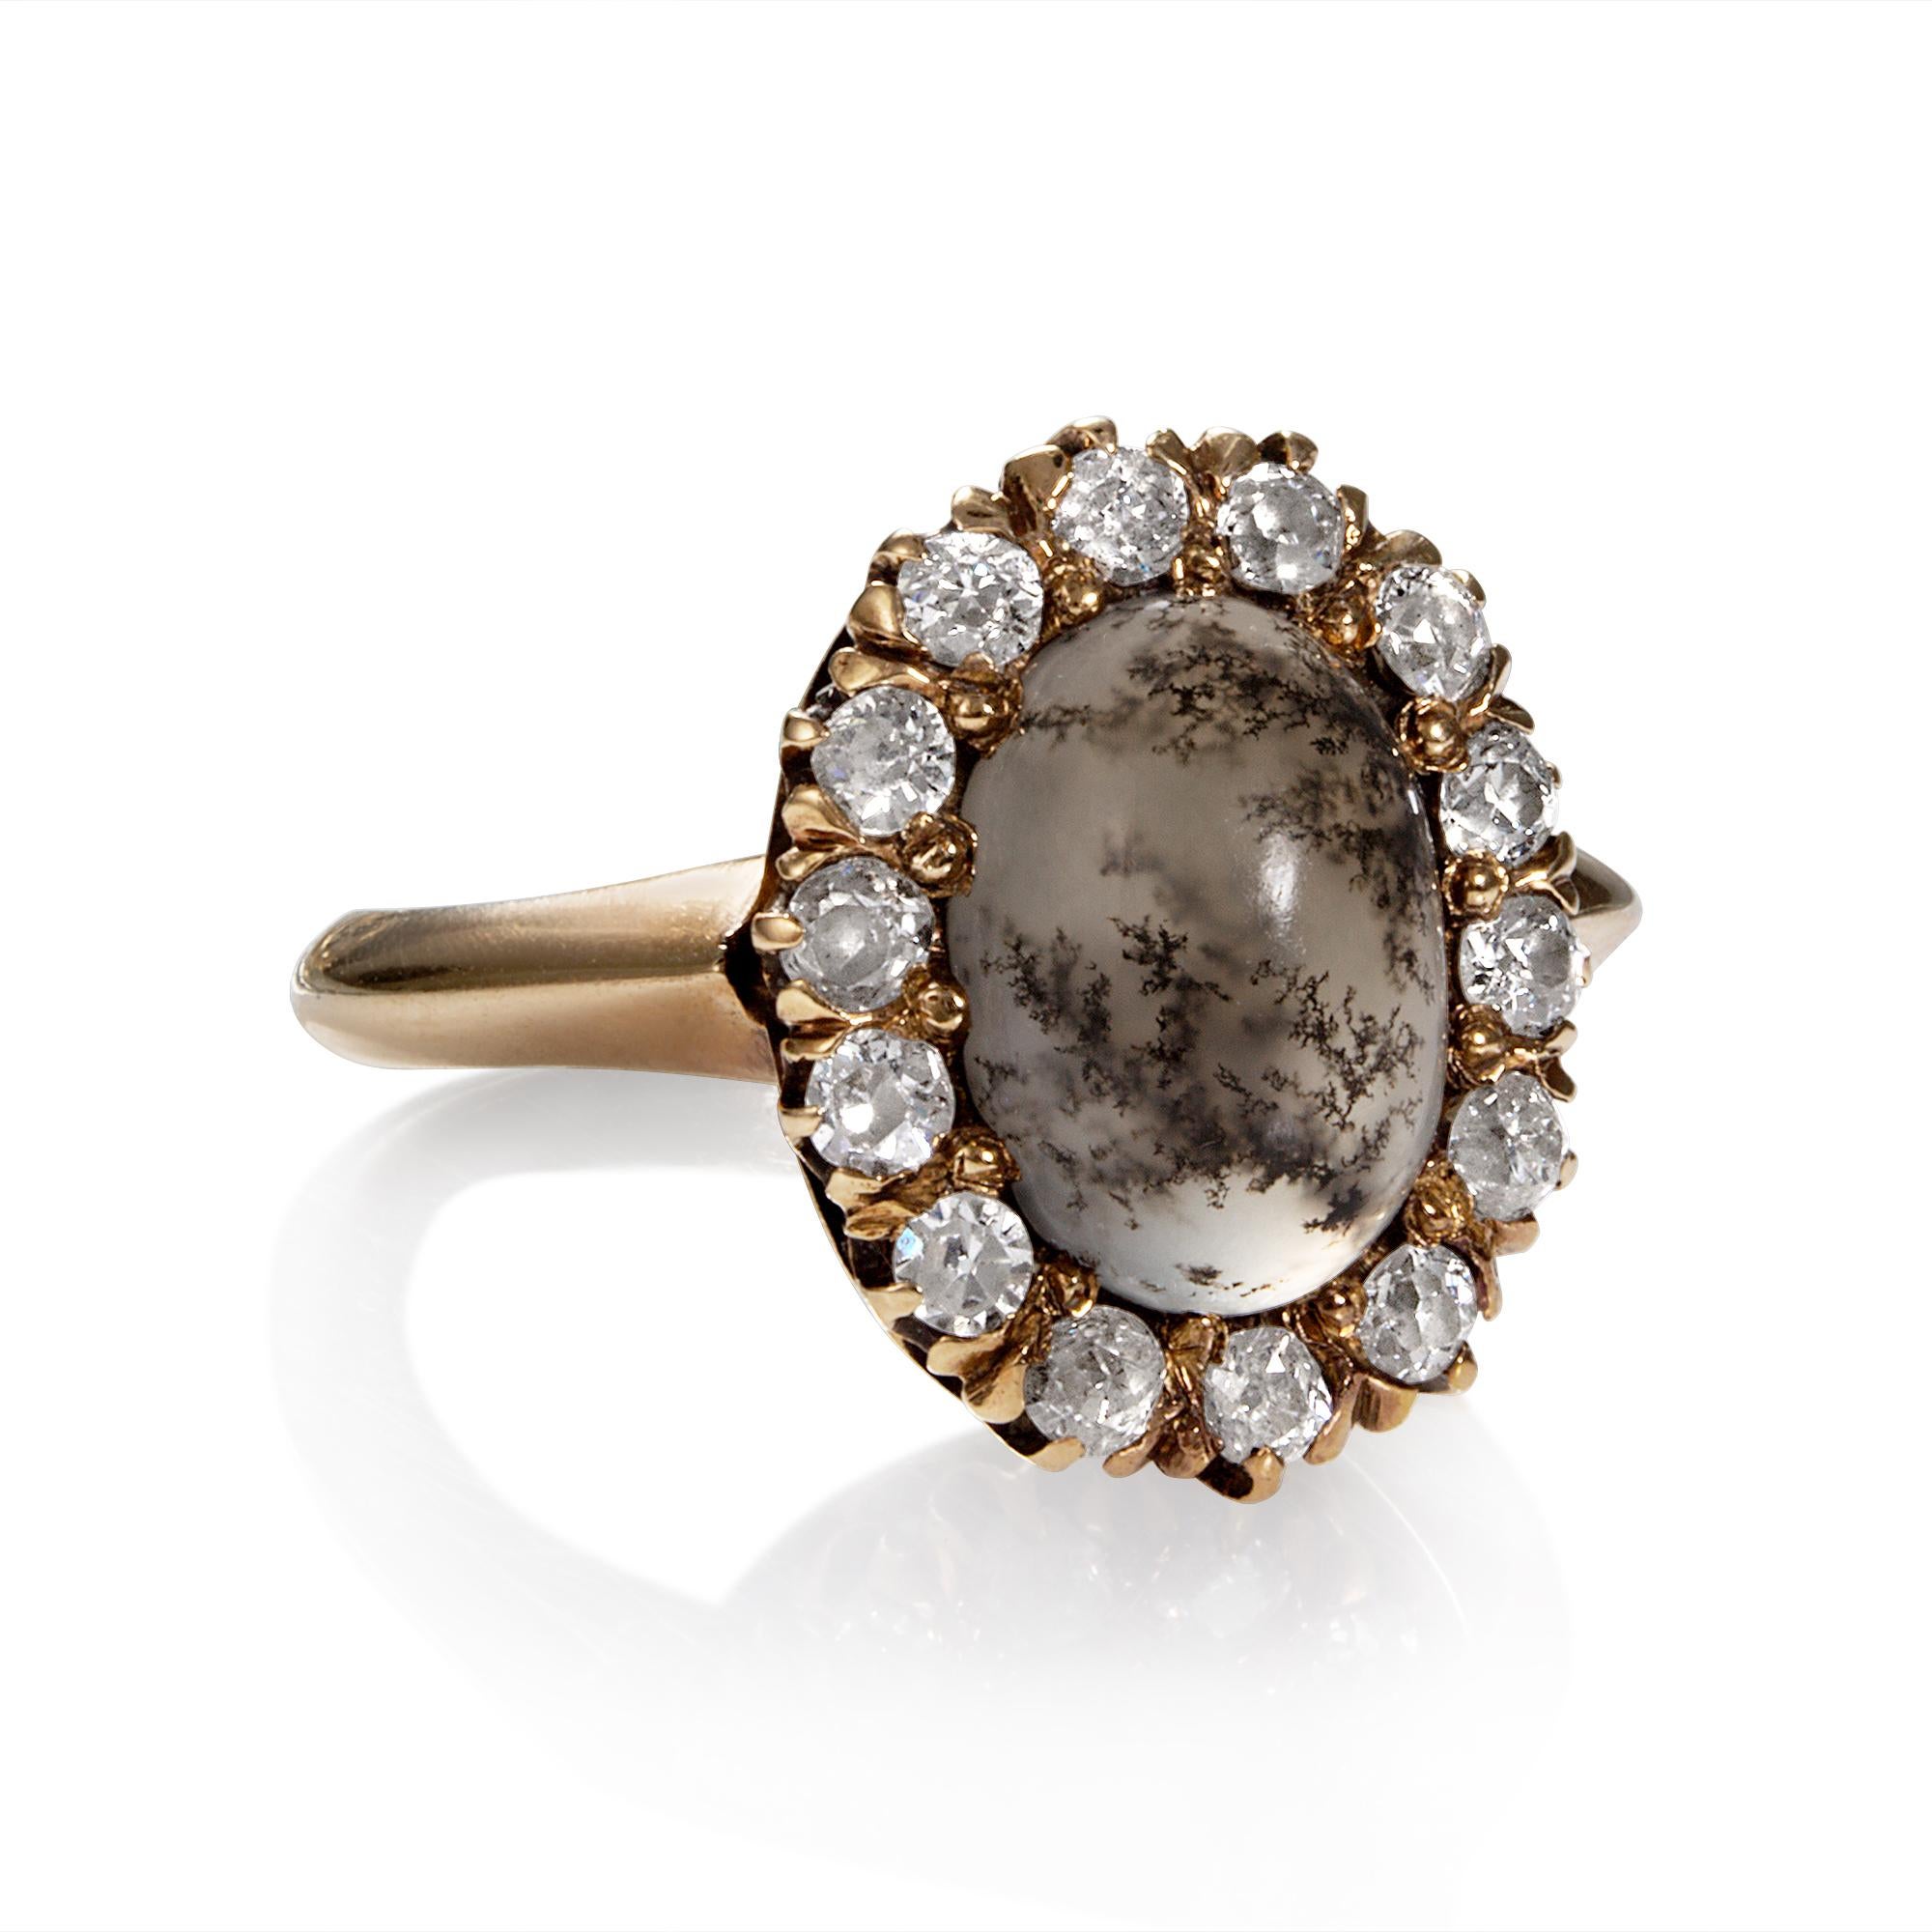 A Beautiful Authentic Classic VICTORIAN Dendritic Quartz and Diamonds Cluster Ring, hand-fabricated in 14K Yellow Gold, CIRCA 1890.
A Little Scene of Nature, a transparent, shimmery and iridescent Dendritic quartz, oval cabochon centers a glittering